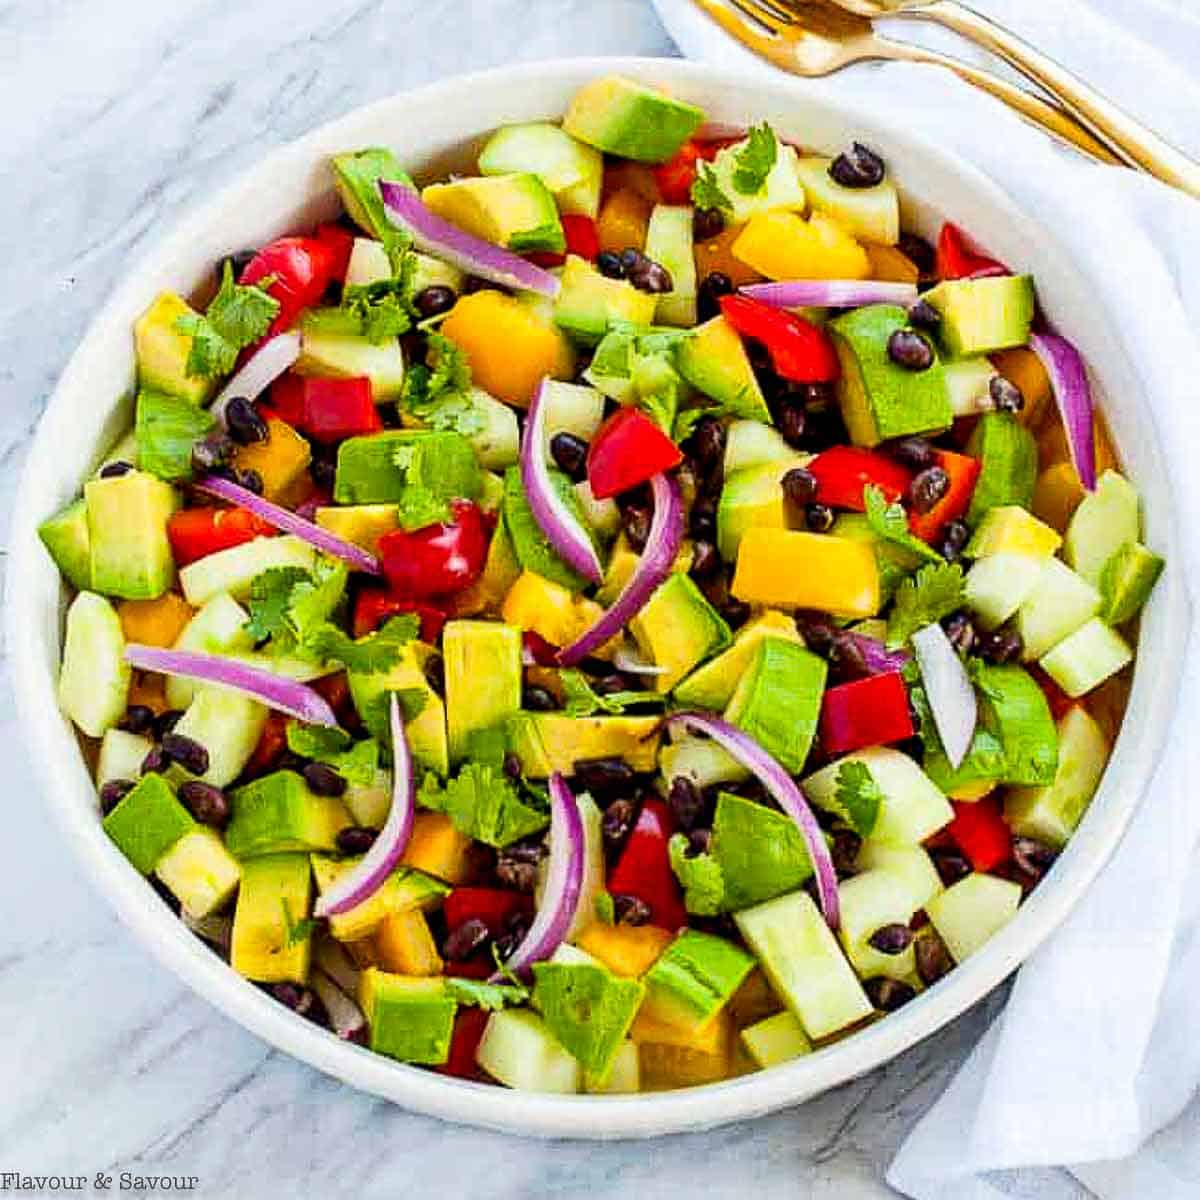 Tomato Avocado Black Bean Salad with Cilantro Lime Dressing from https://www.flavourandsavour.com/